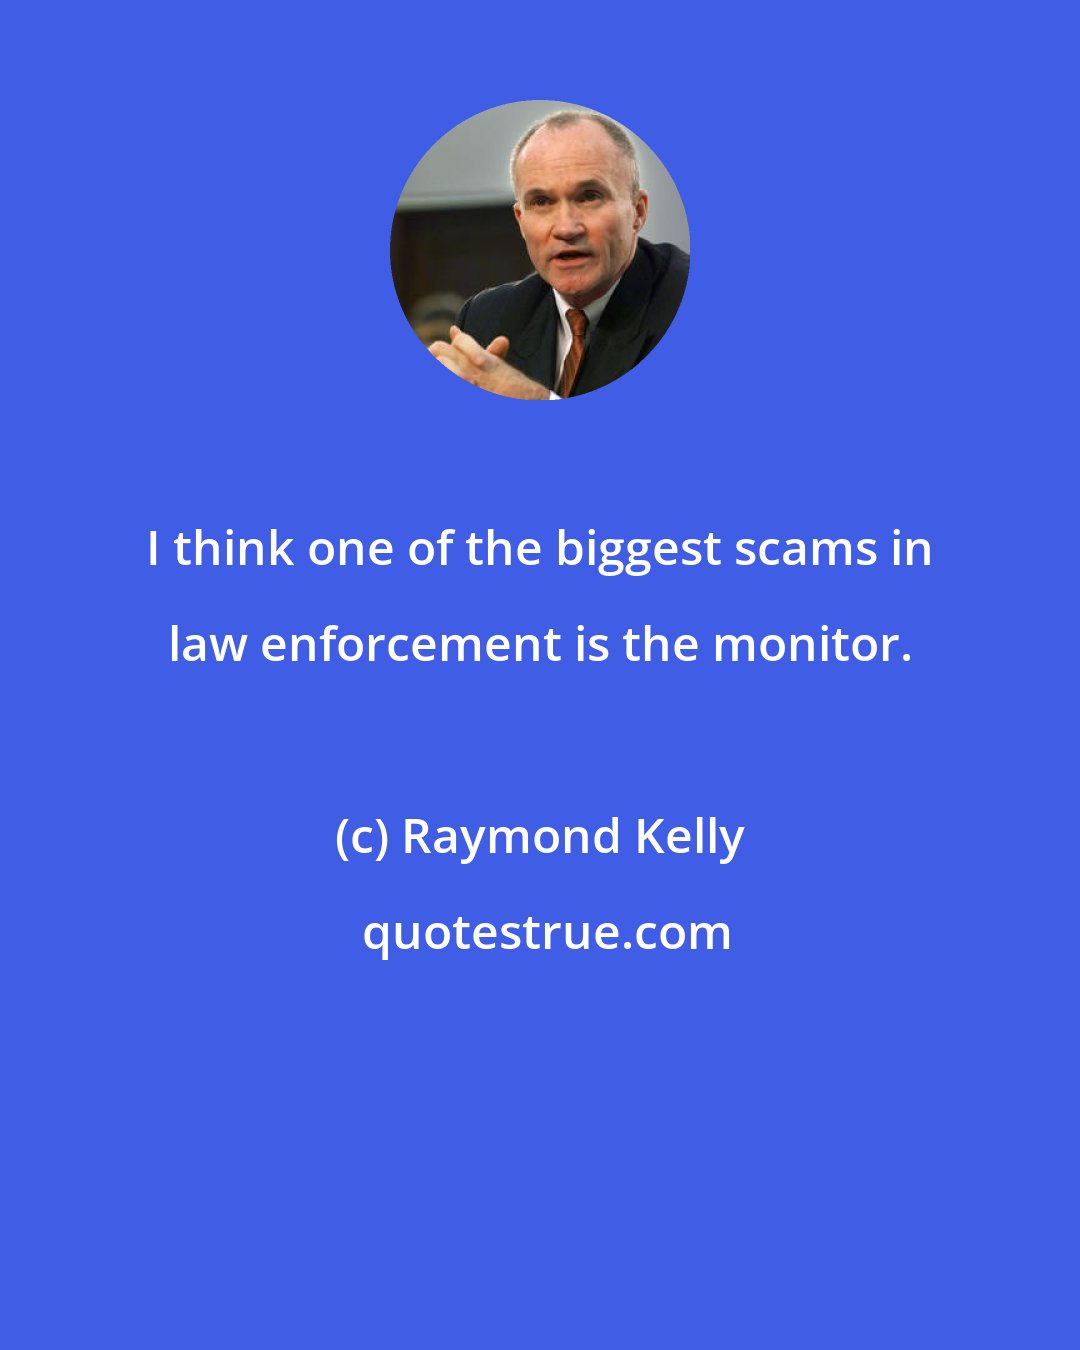 Raymond Kelly: I think one of the biggest scams in law enforcement is the monitor.